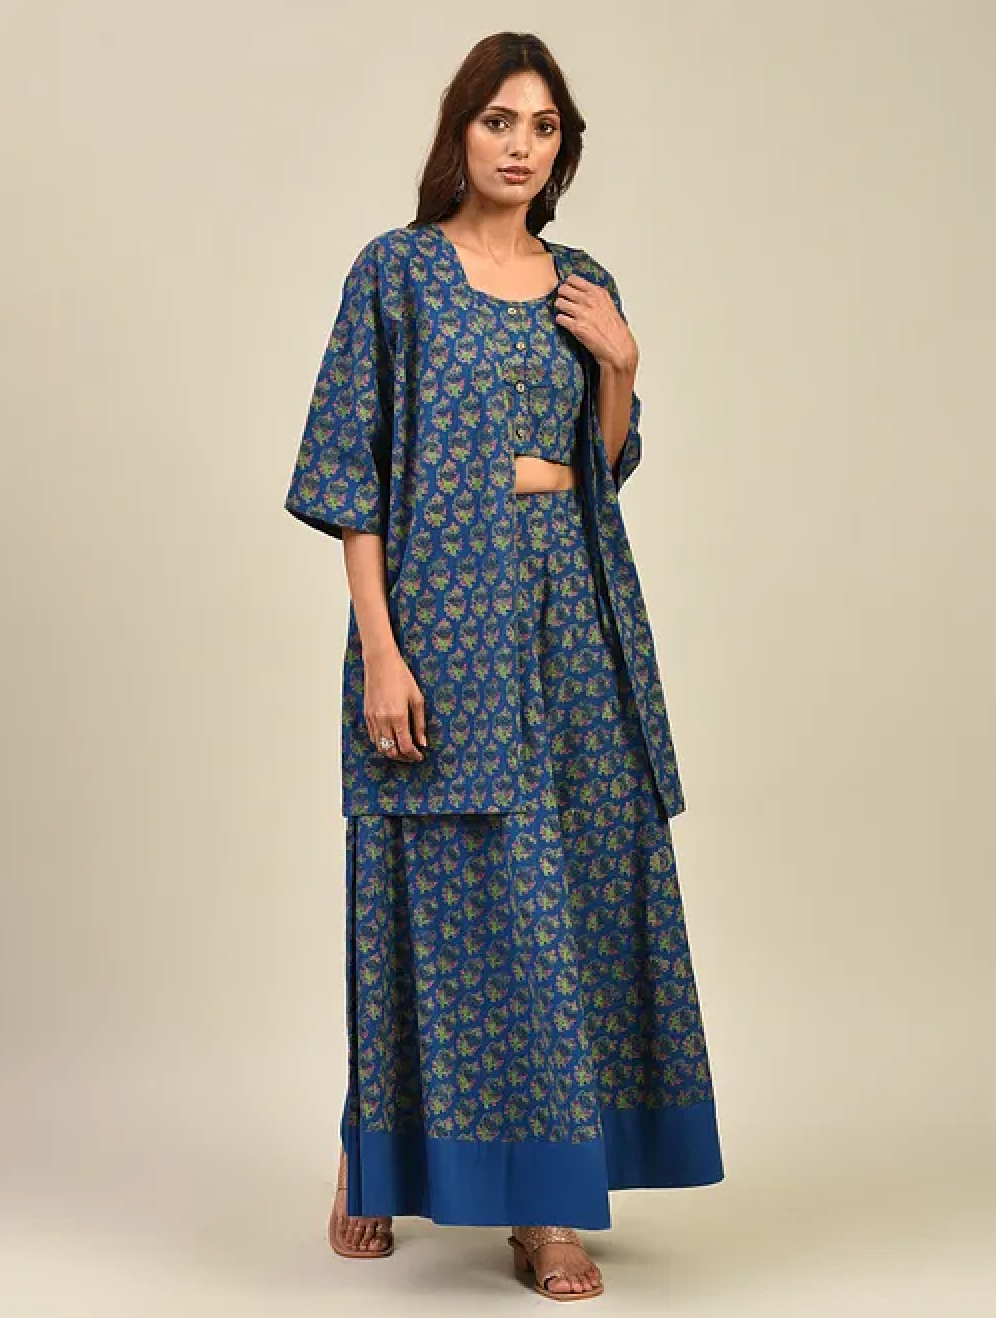 Blue Hand-block Printed Cotton Lehenga with Blouse and Dupatta/Cape (set of 3)